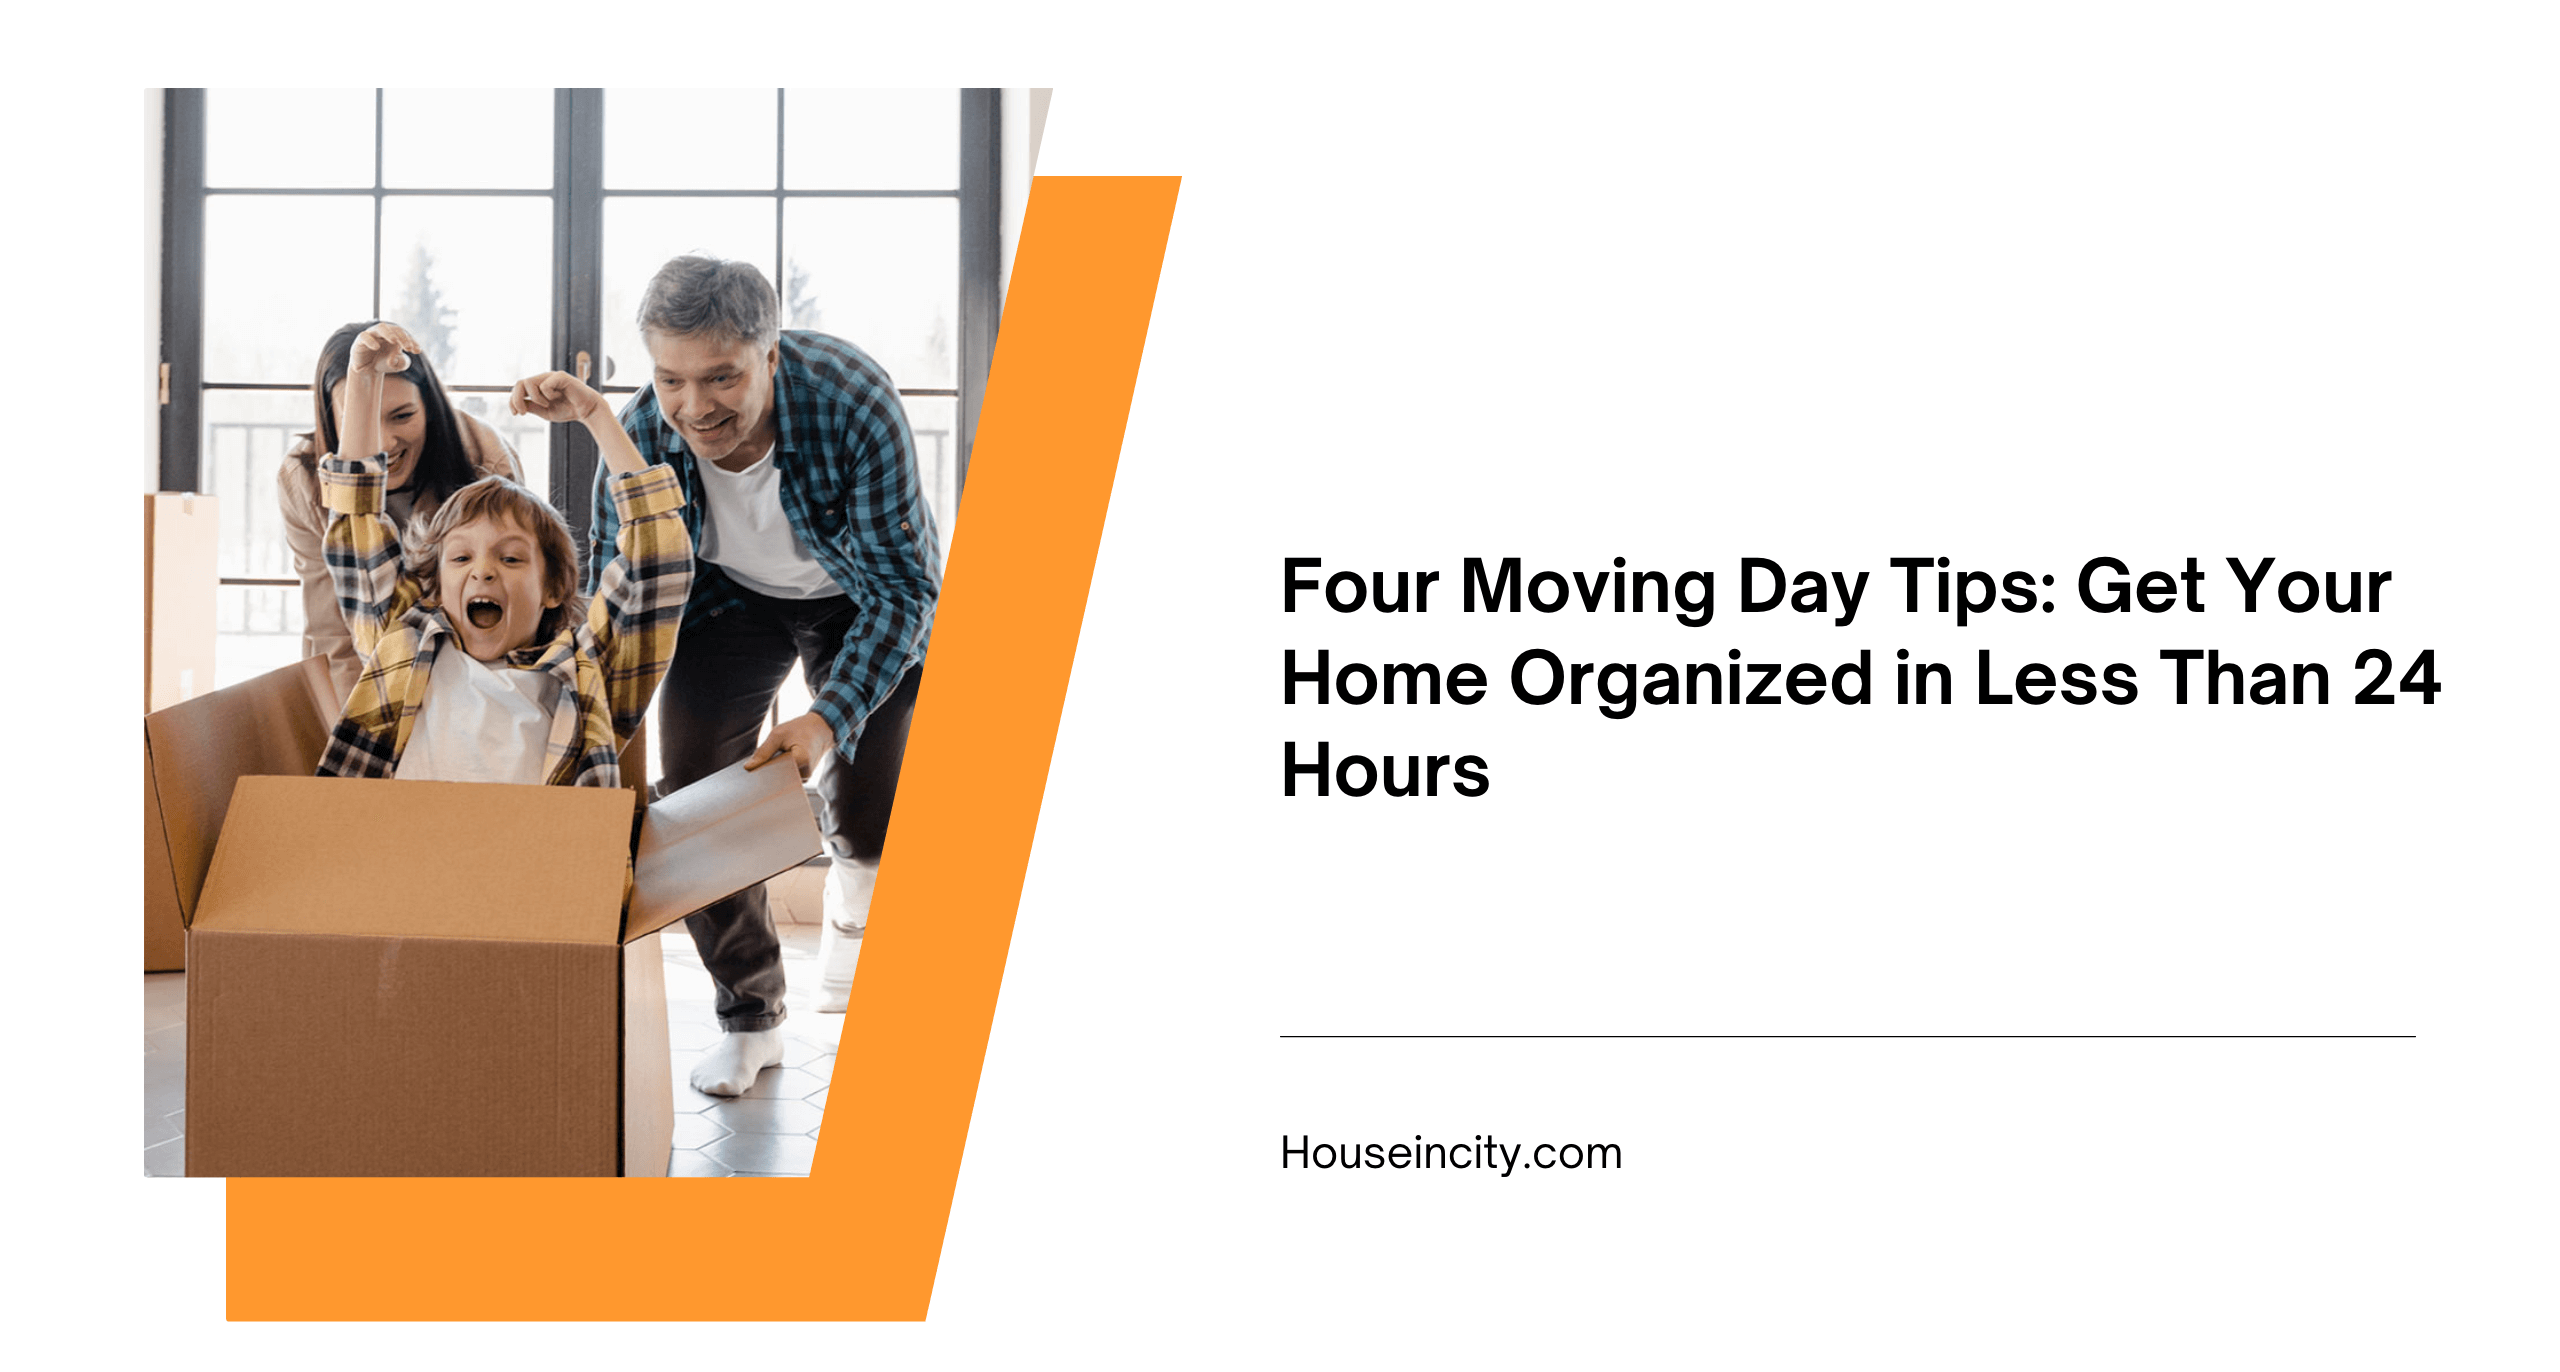 Four Moving Day Tips: Get Your Home Organized in Less Than 24 Hours